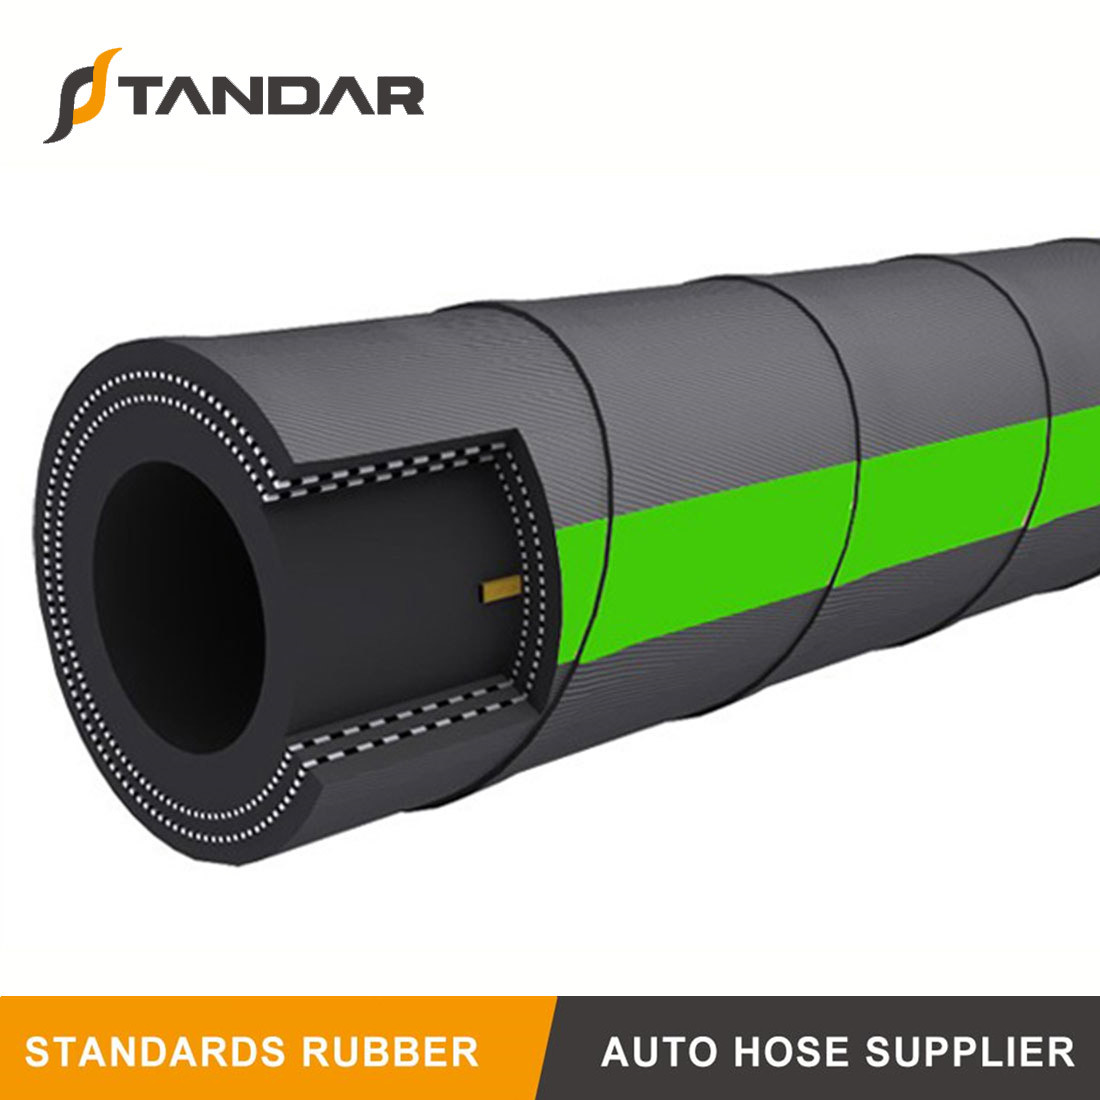 How To Identify Good Or Poor Quality Of Hydraulic Rubber Hose